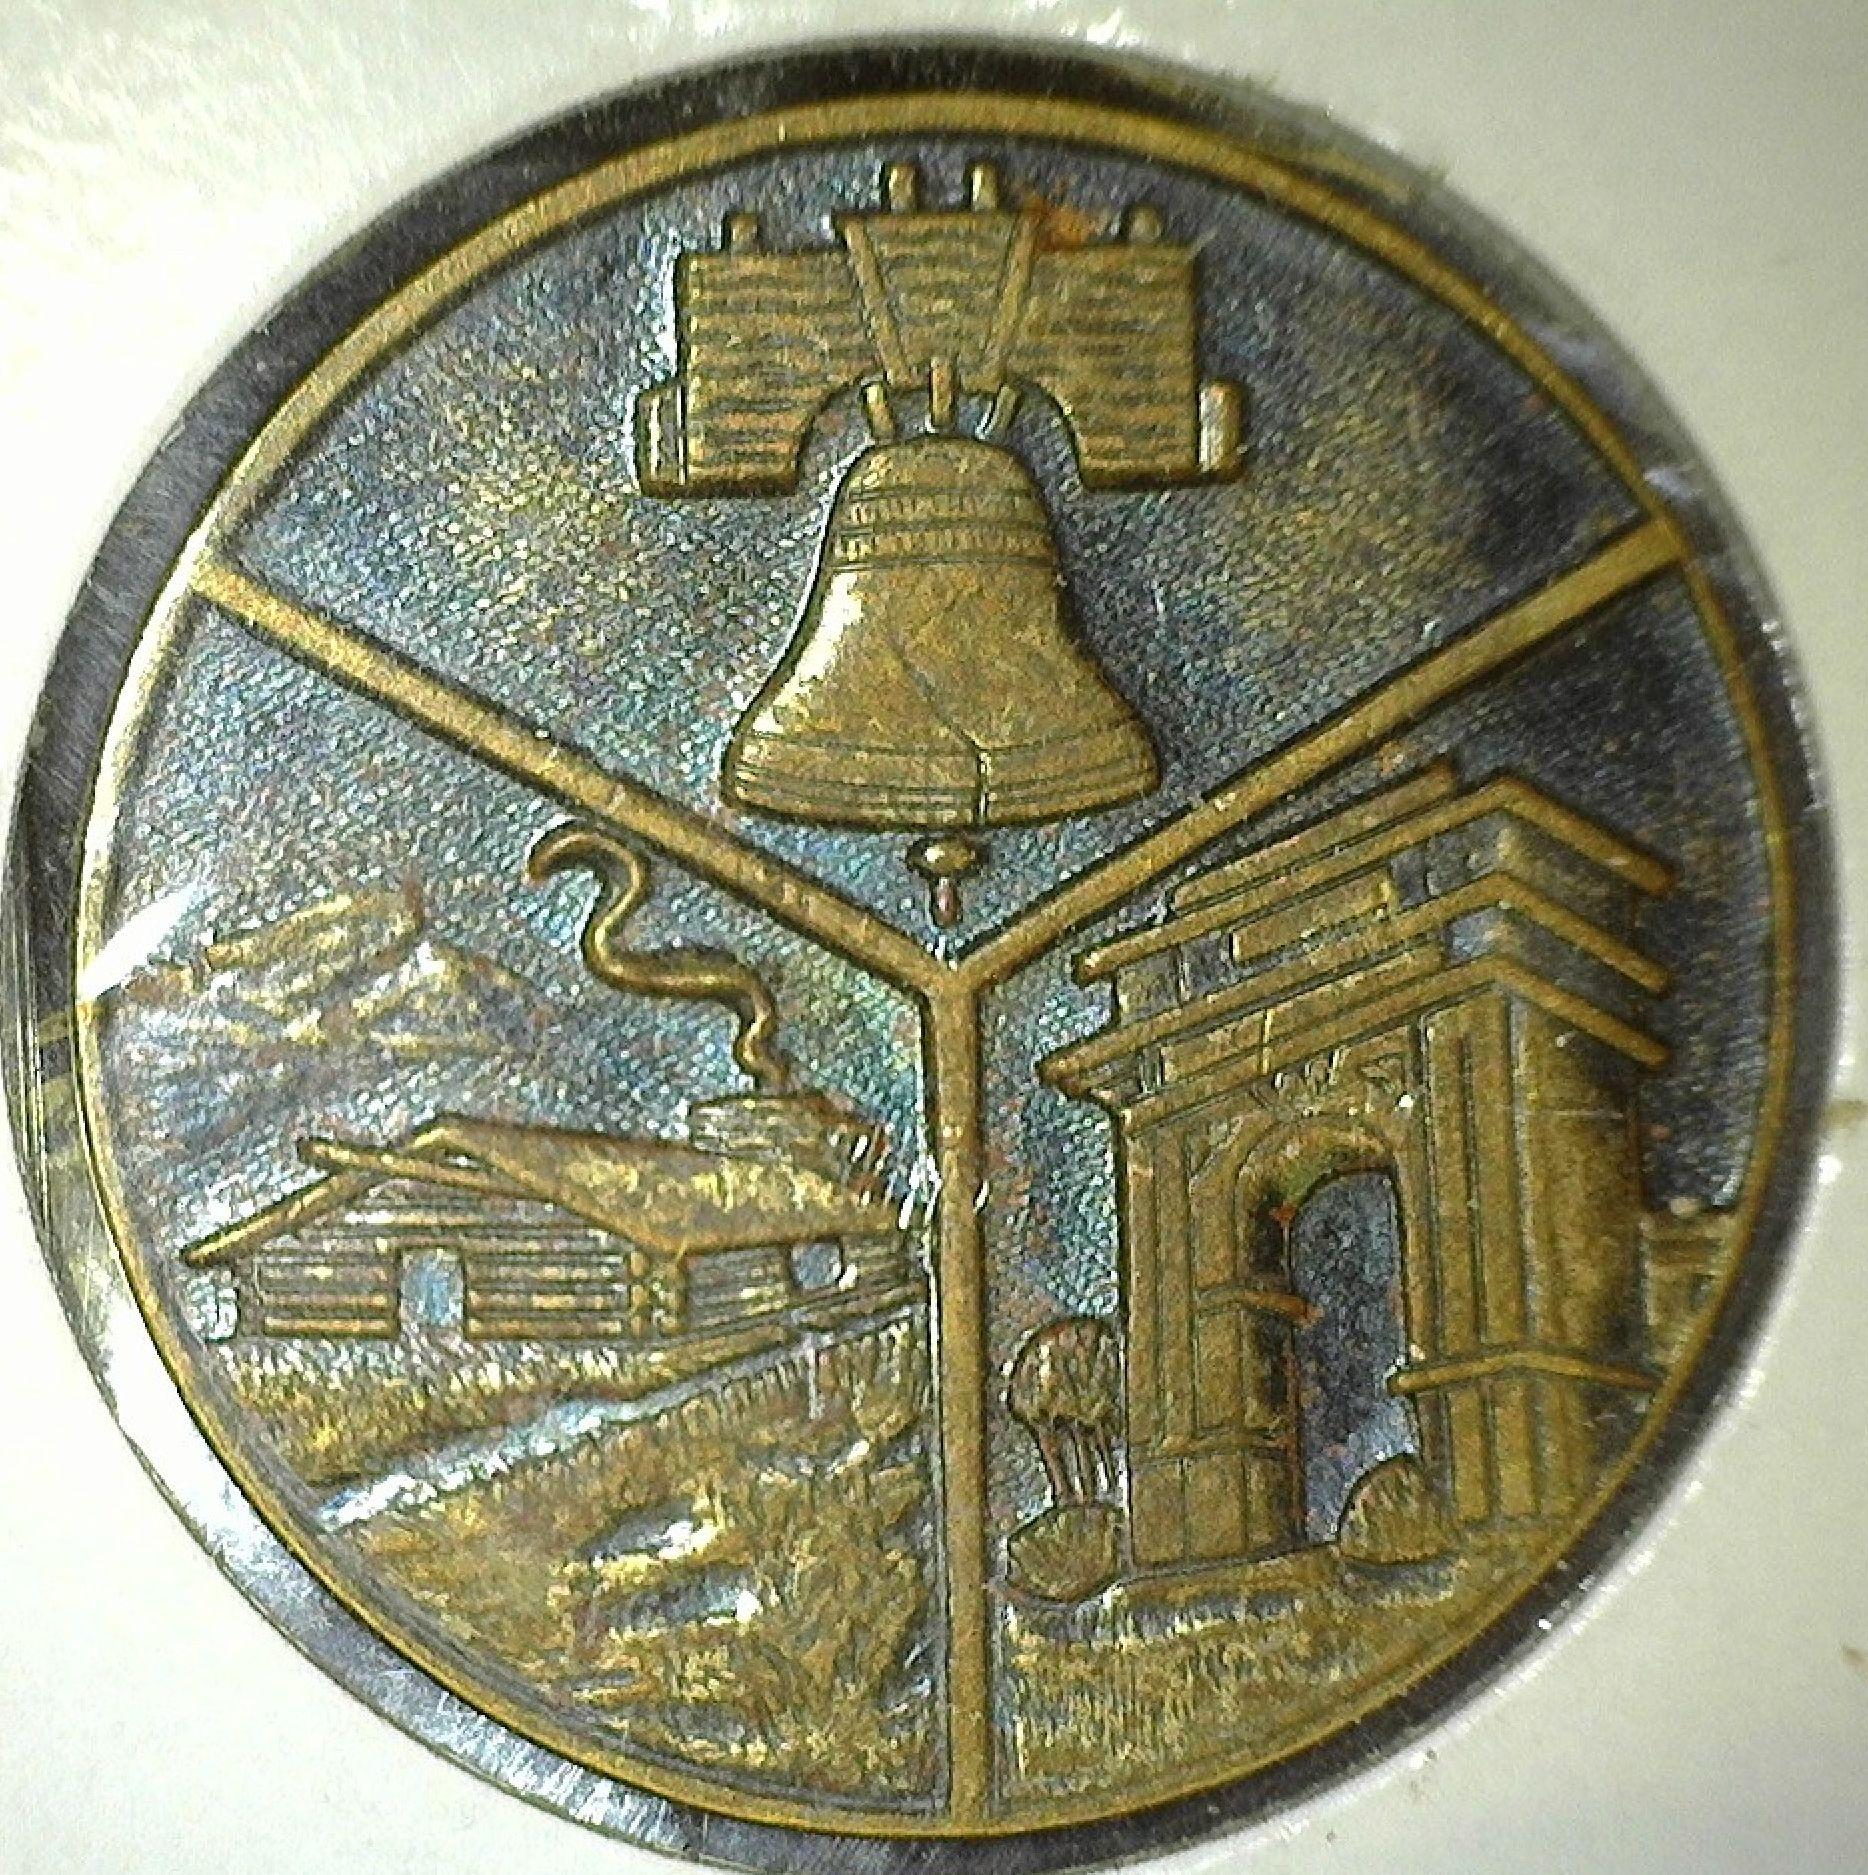 "1964 National Jamboree-Valley Forge/Boy Scouts of America", rd., brass, 36mm.